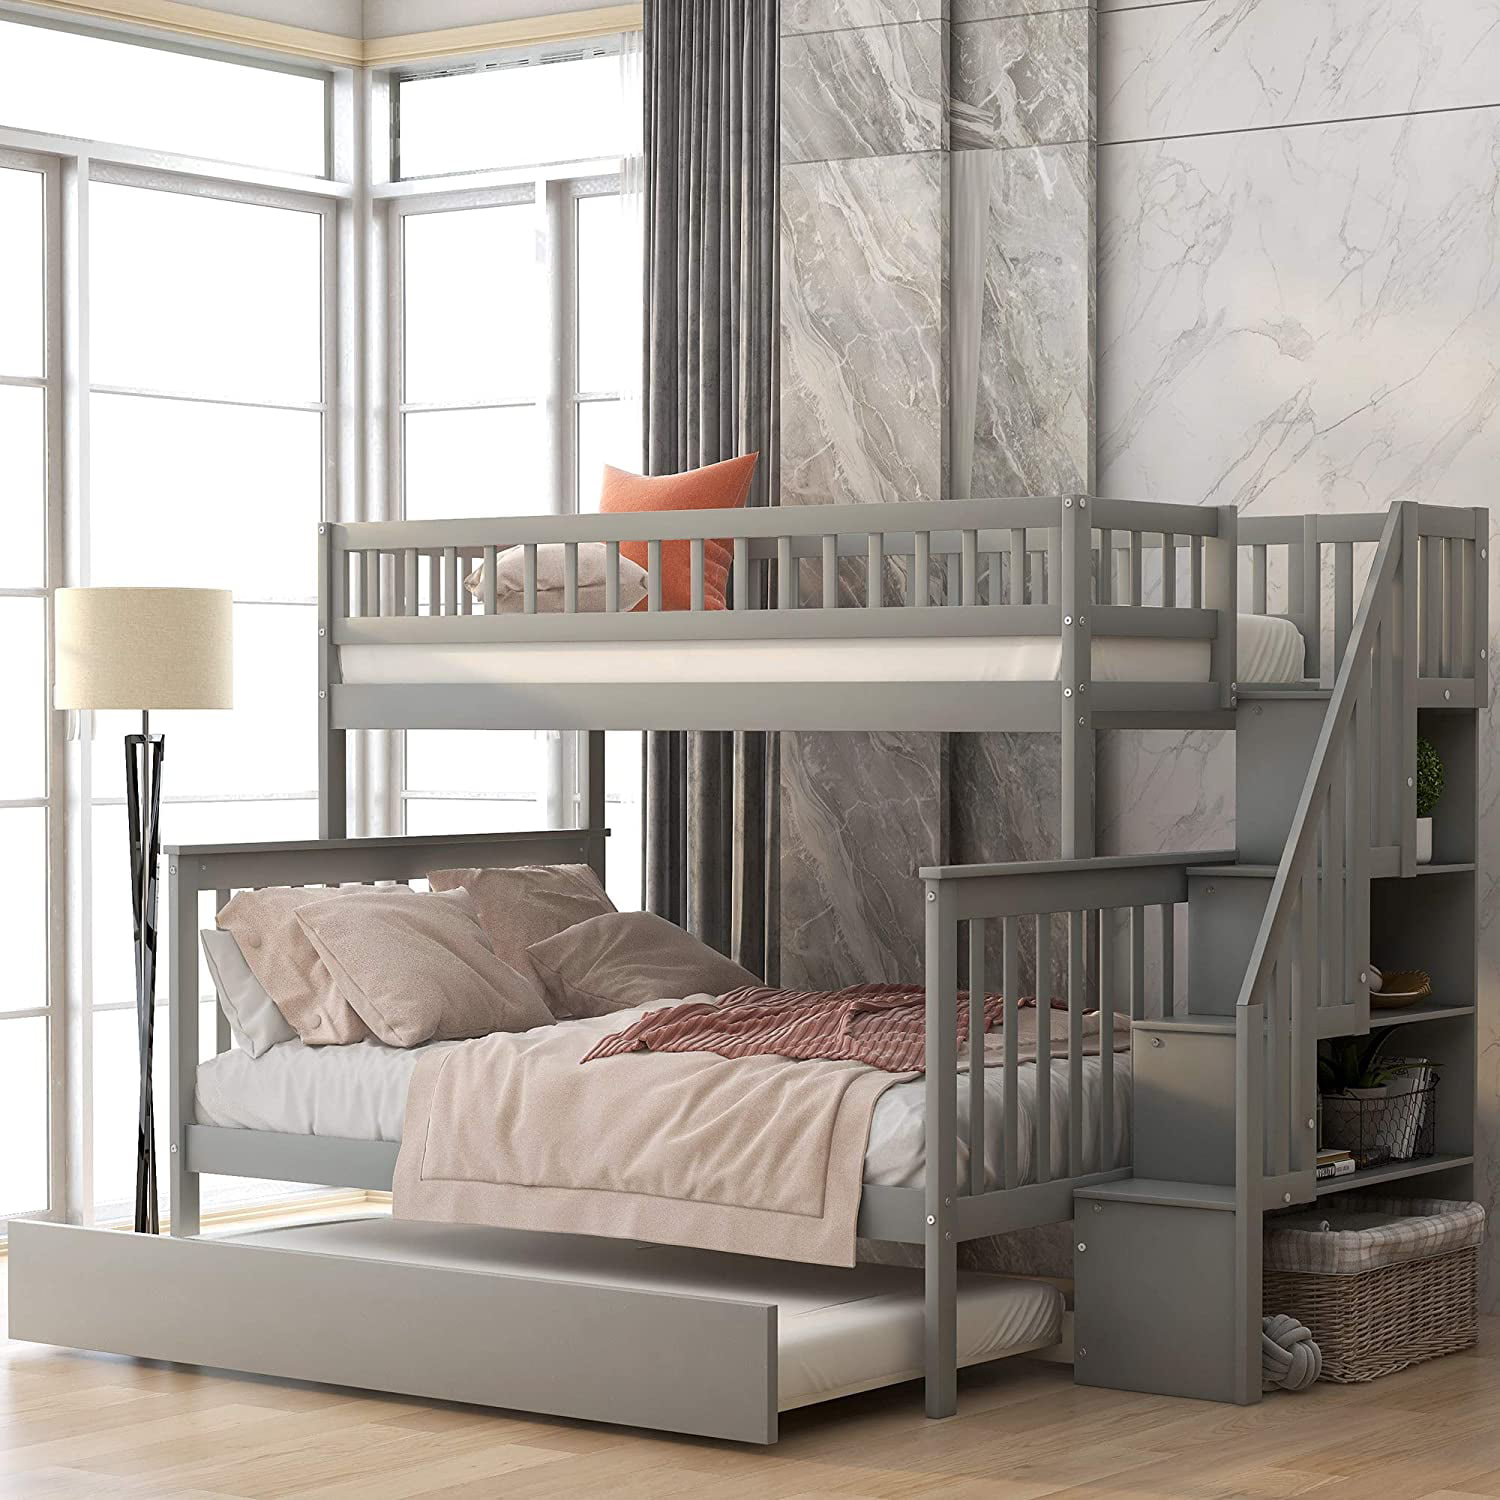 Piscis Bunk Bed Beds Twin Over, Twin Or Full Size Bed For Toddler